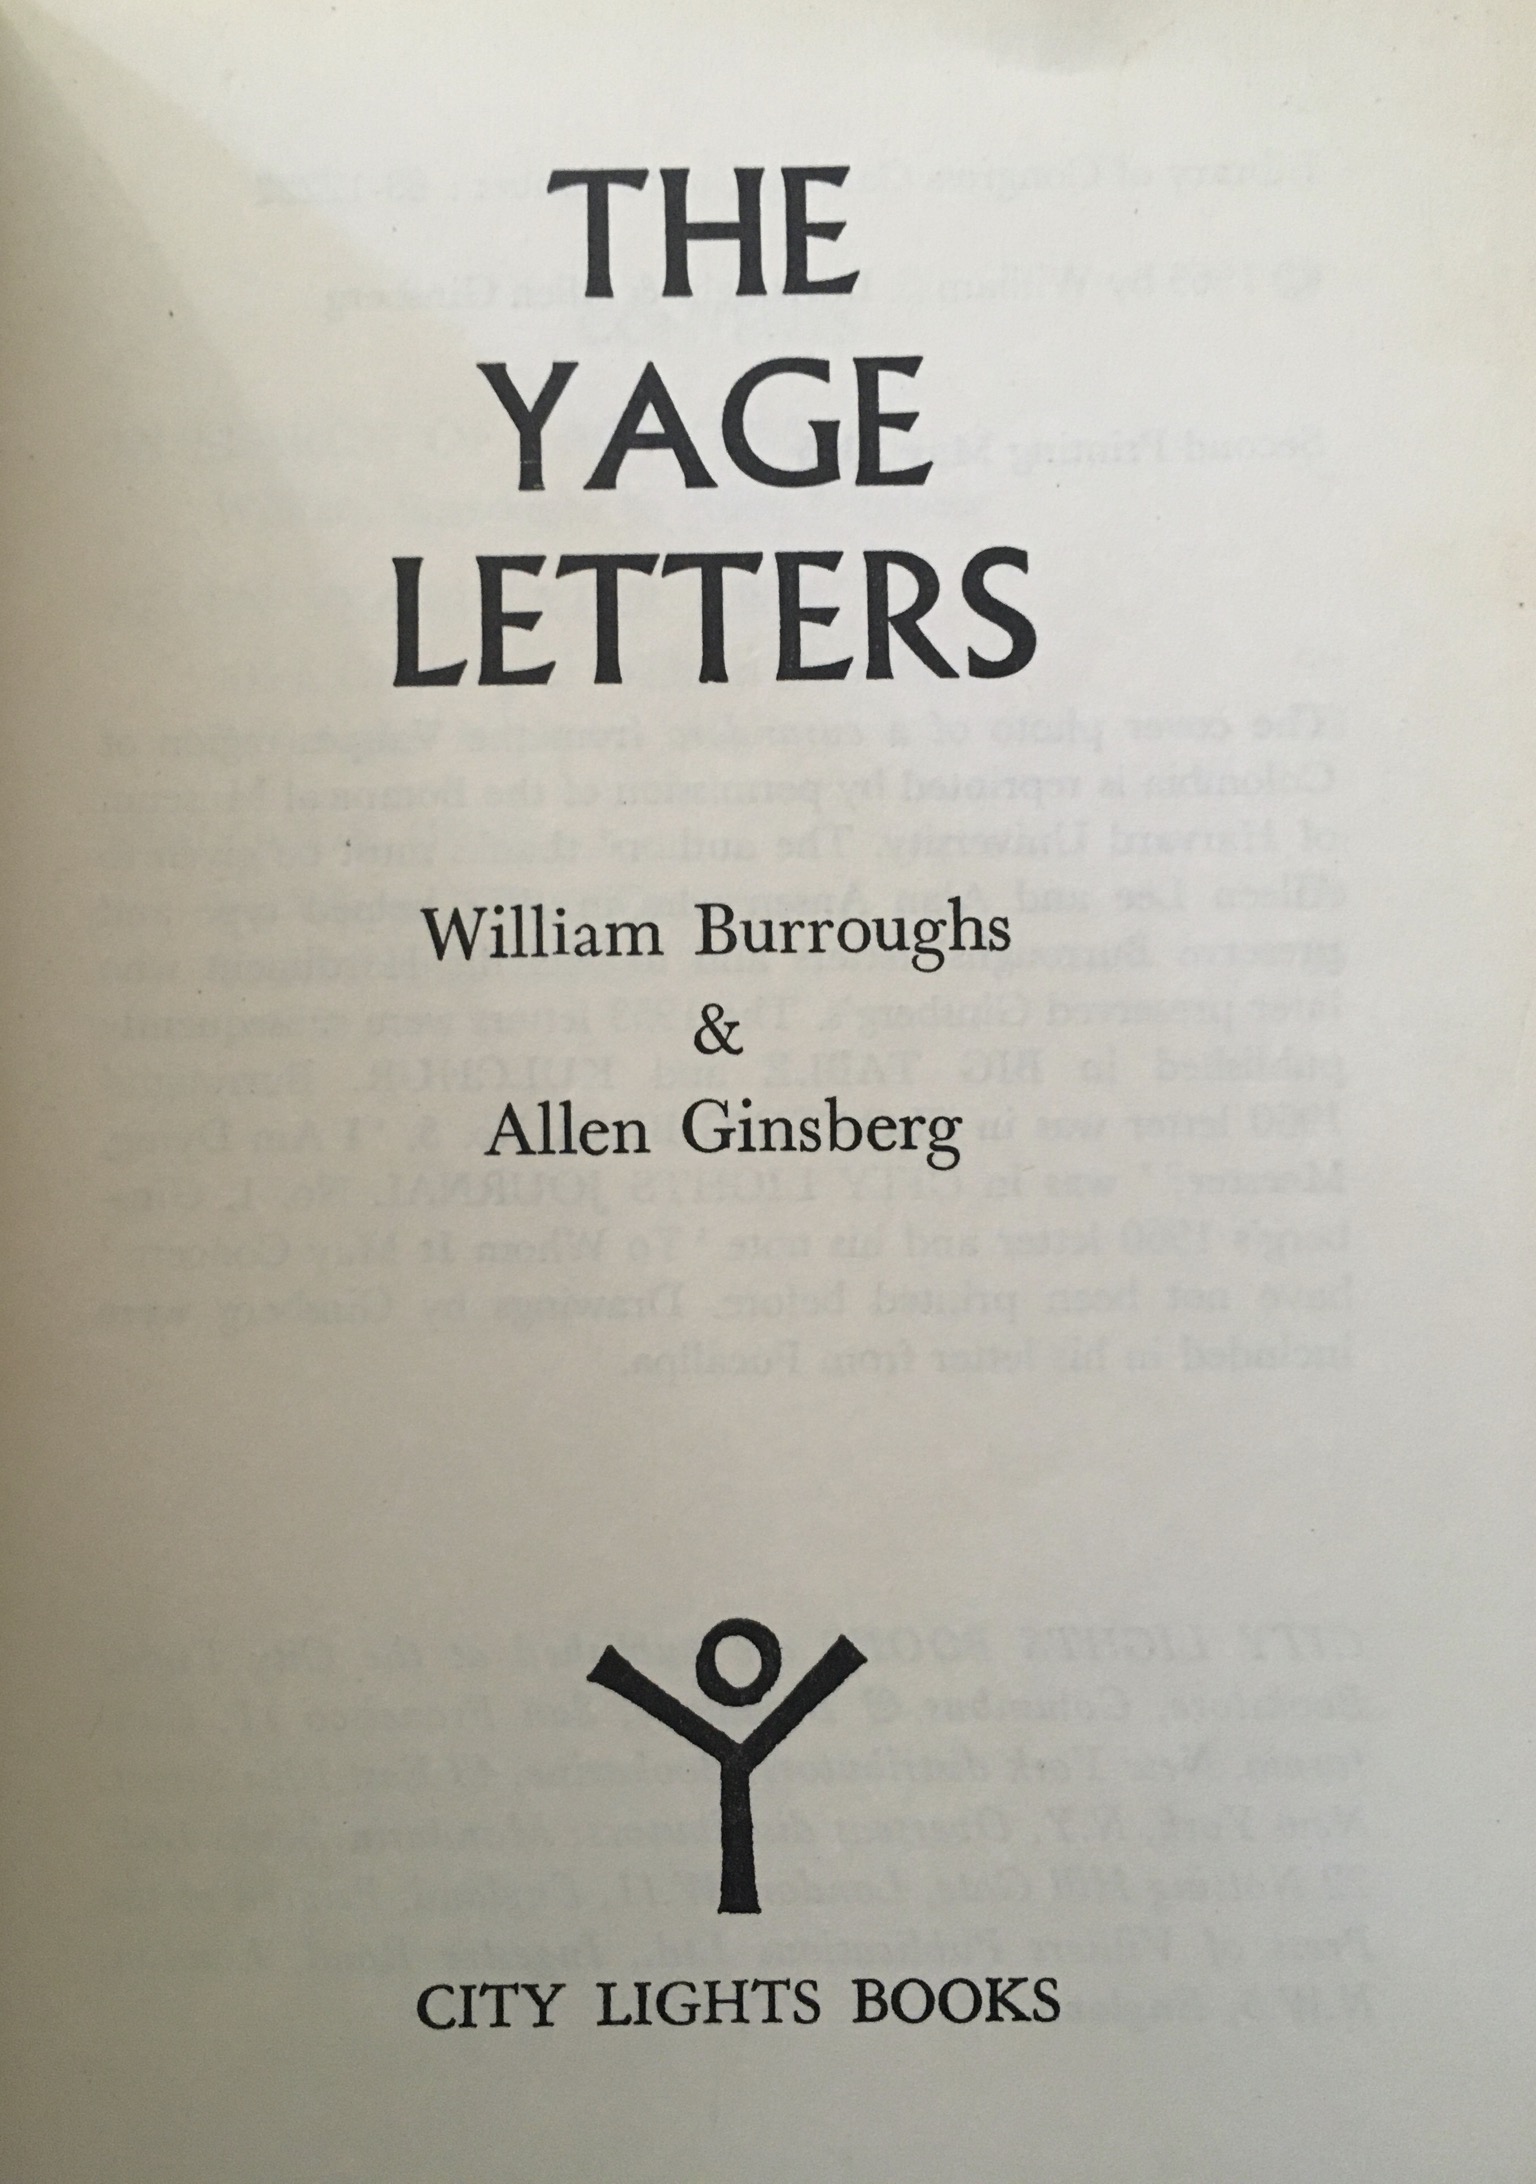 The Yage Letters by William Burroughs & Allen Ginsberg